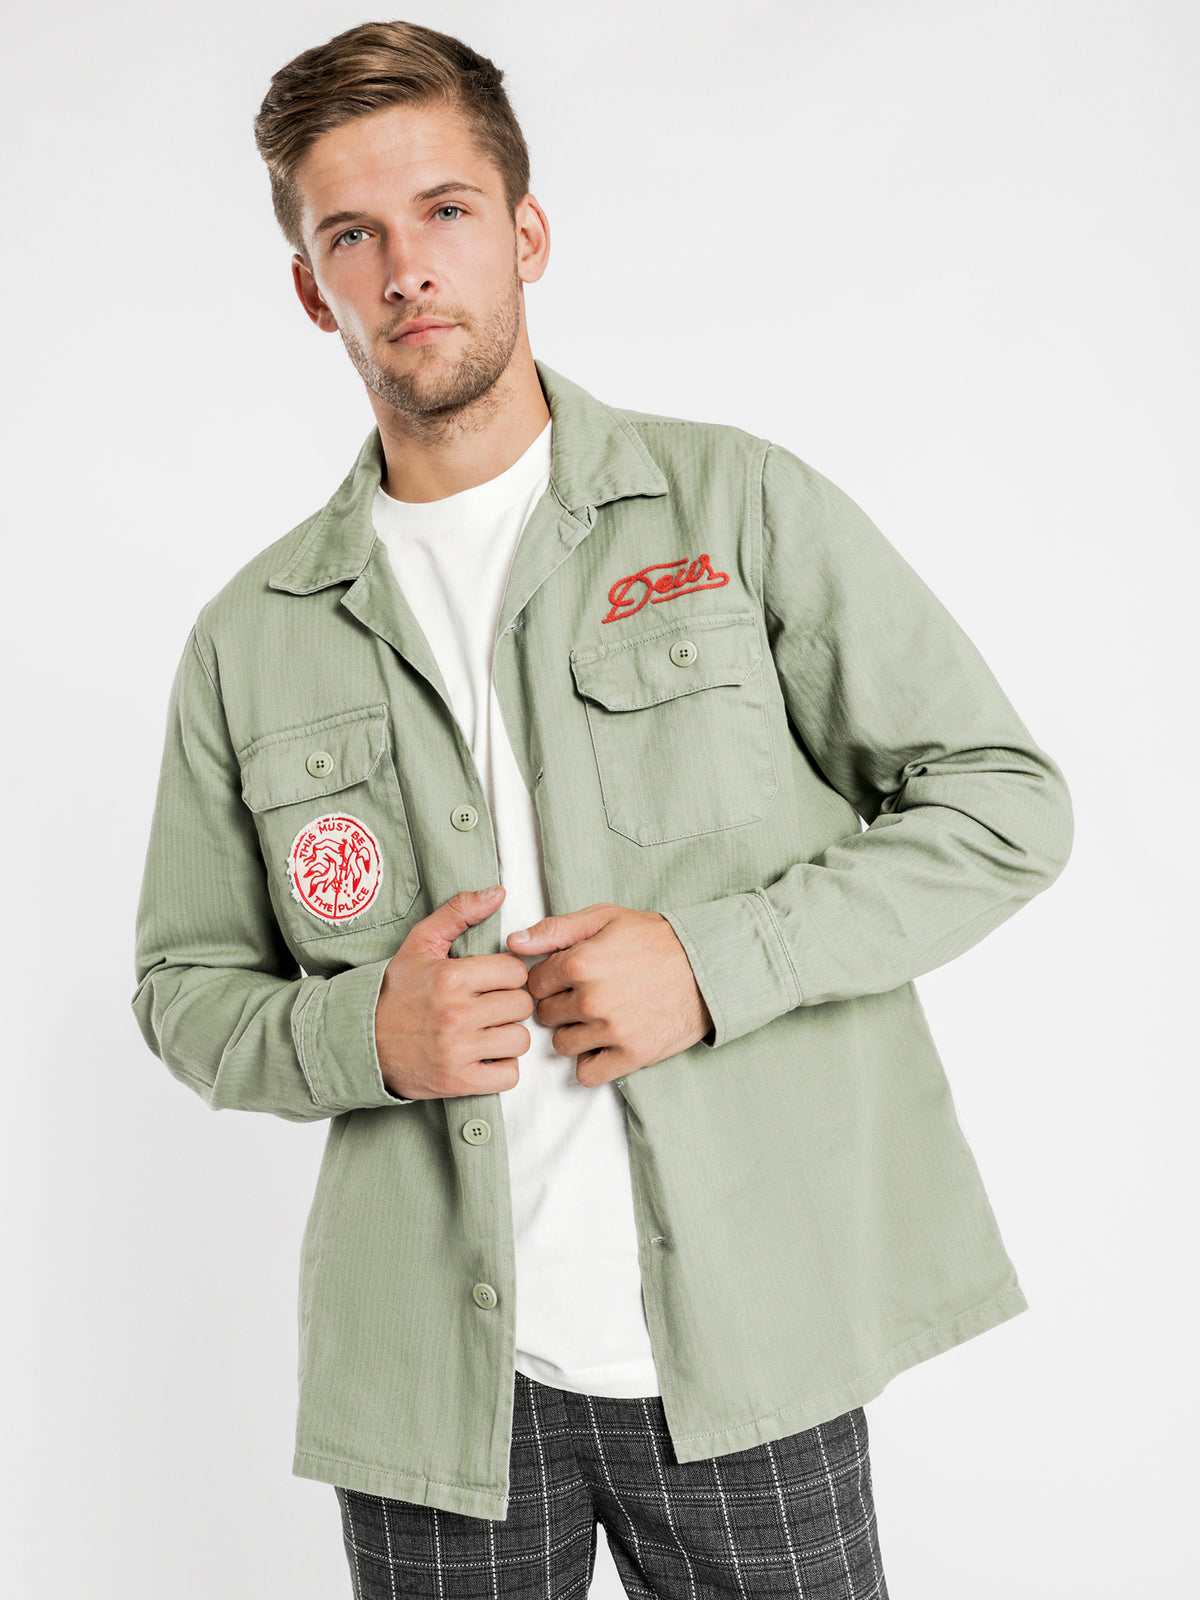 Sea Squalor Shirt in Army Green